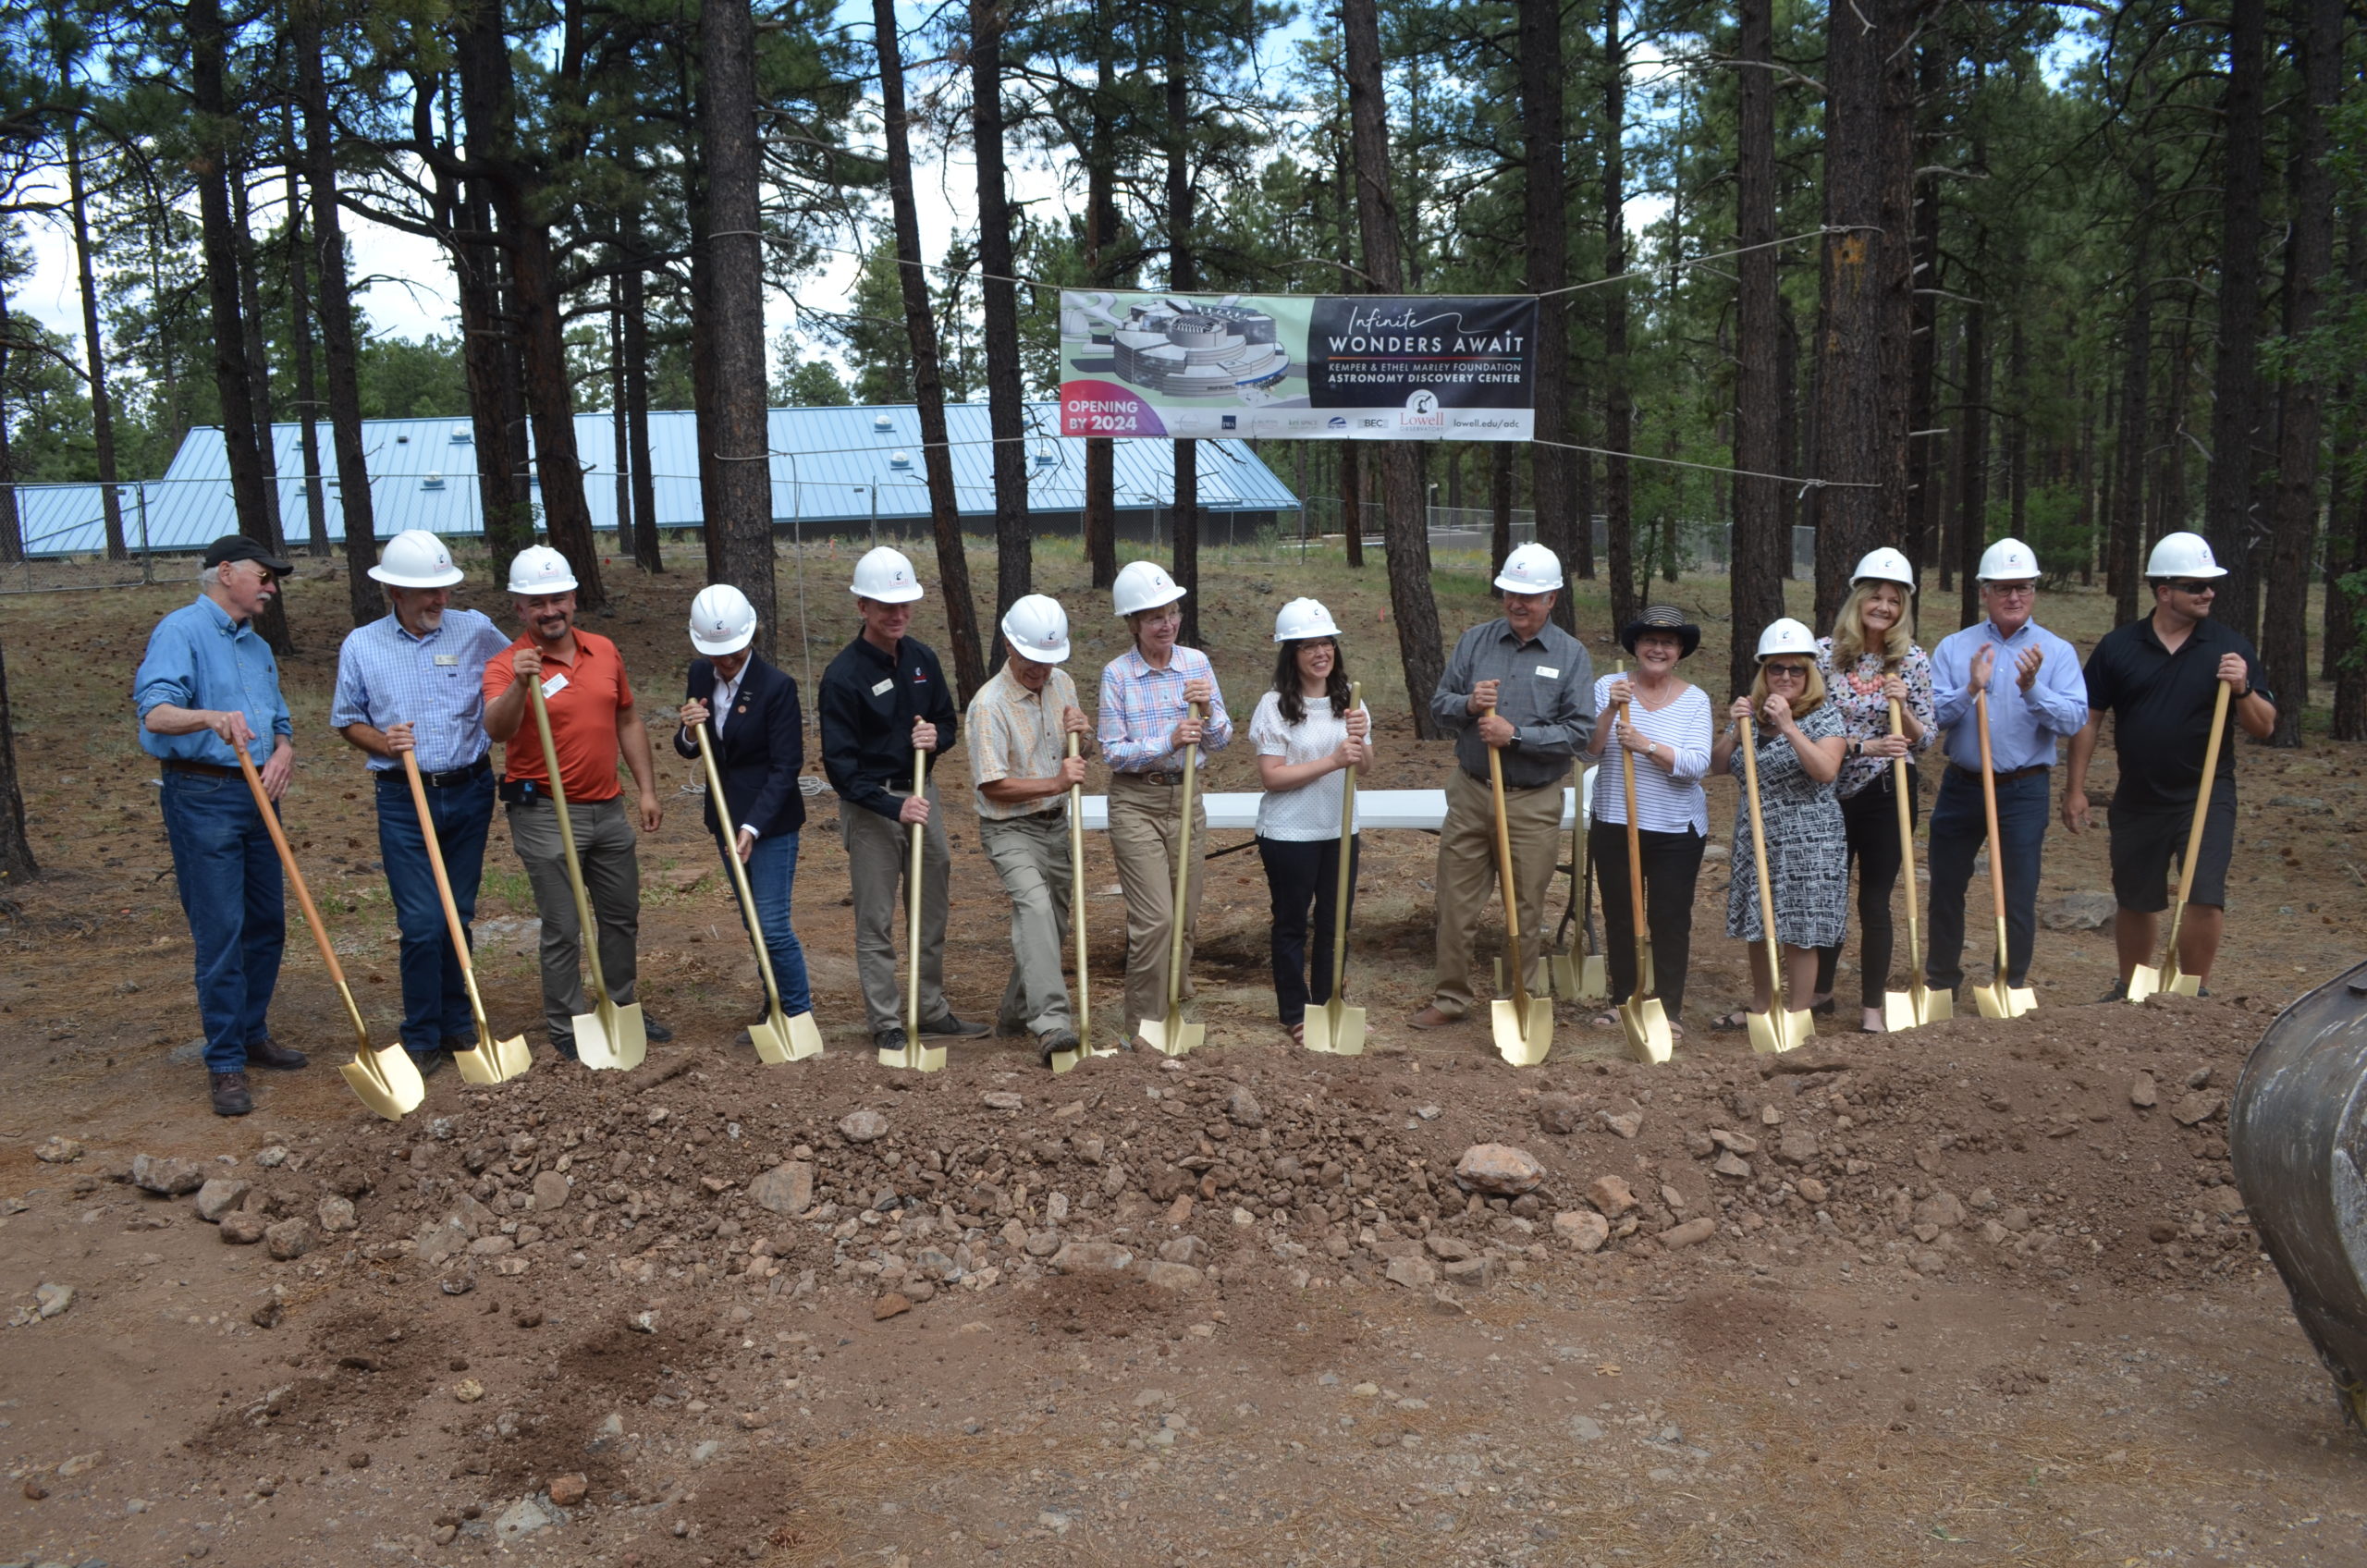 Kemper and Ethel Marley Astronomy Discovery Center Groundbreaking at Lowell Observatory